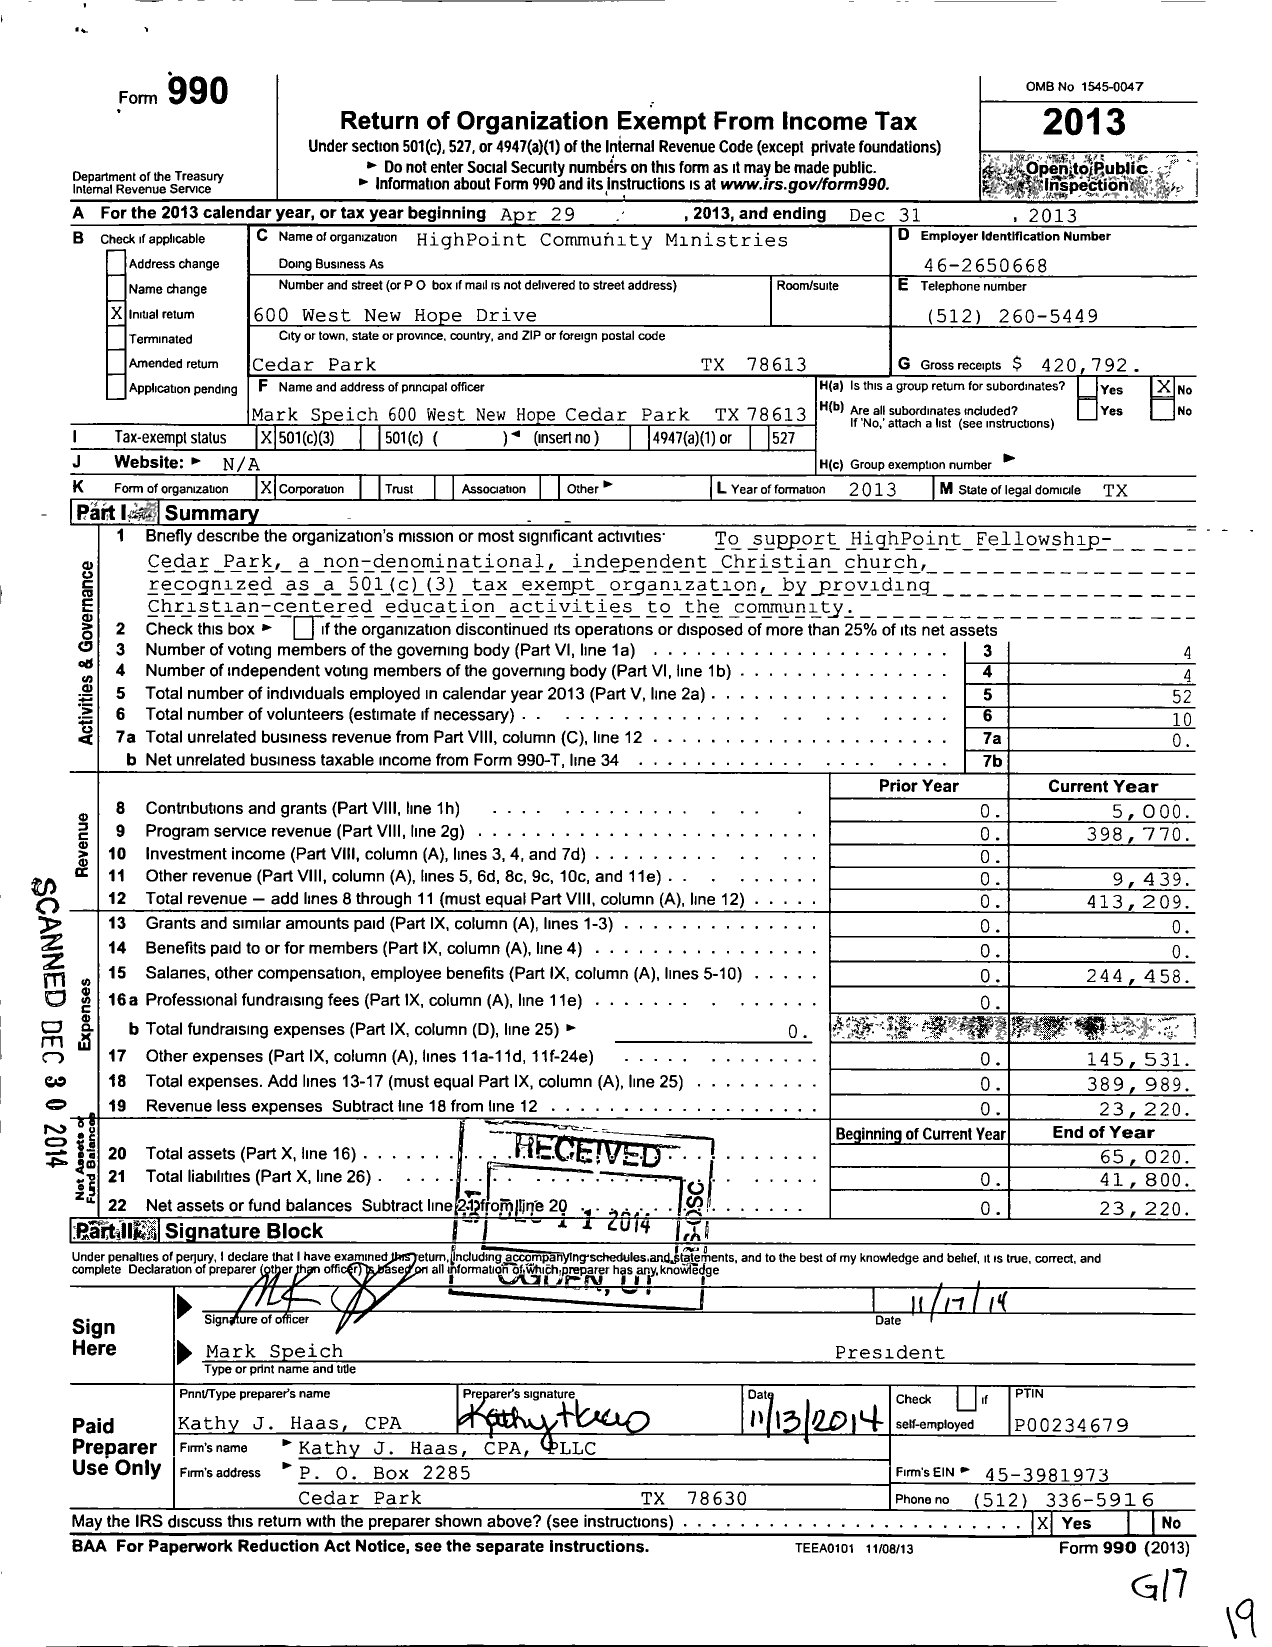 Image of first page of 2013 Form 990 for HighPoint Community Ministries